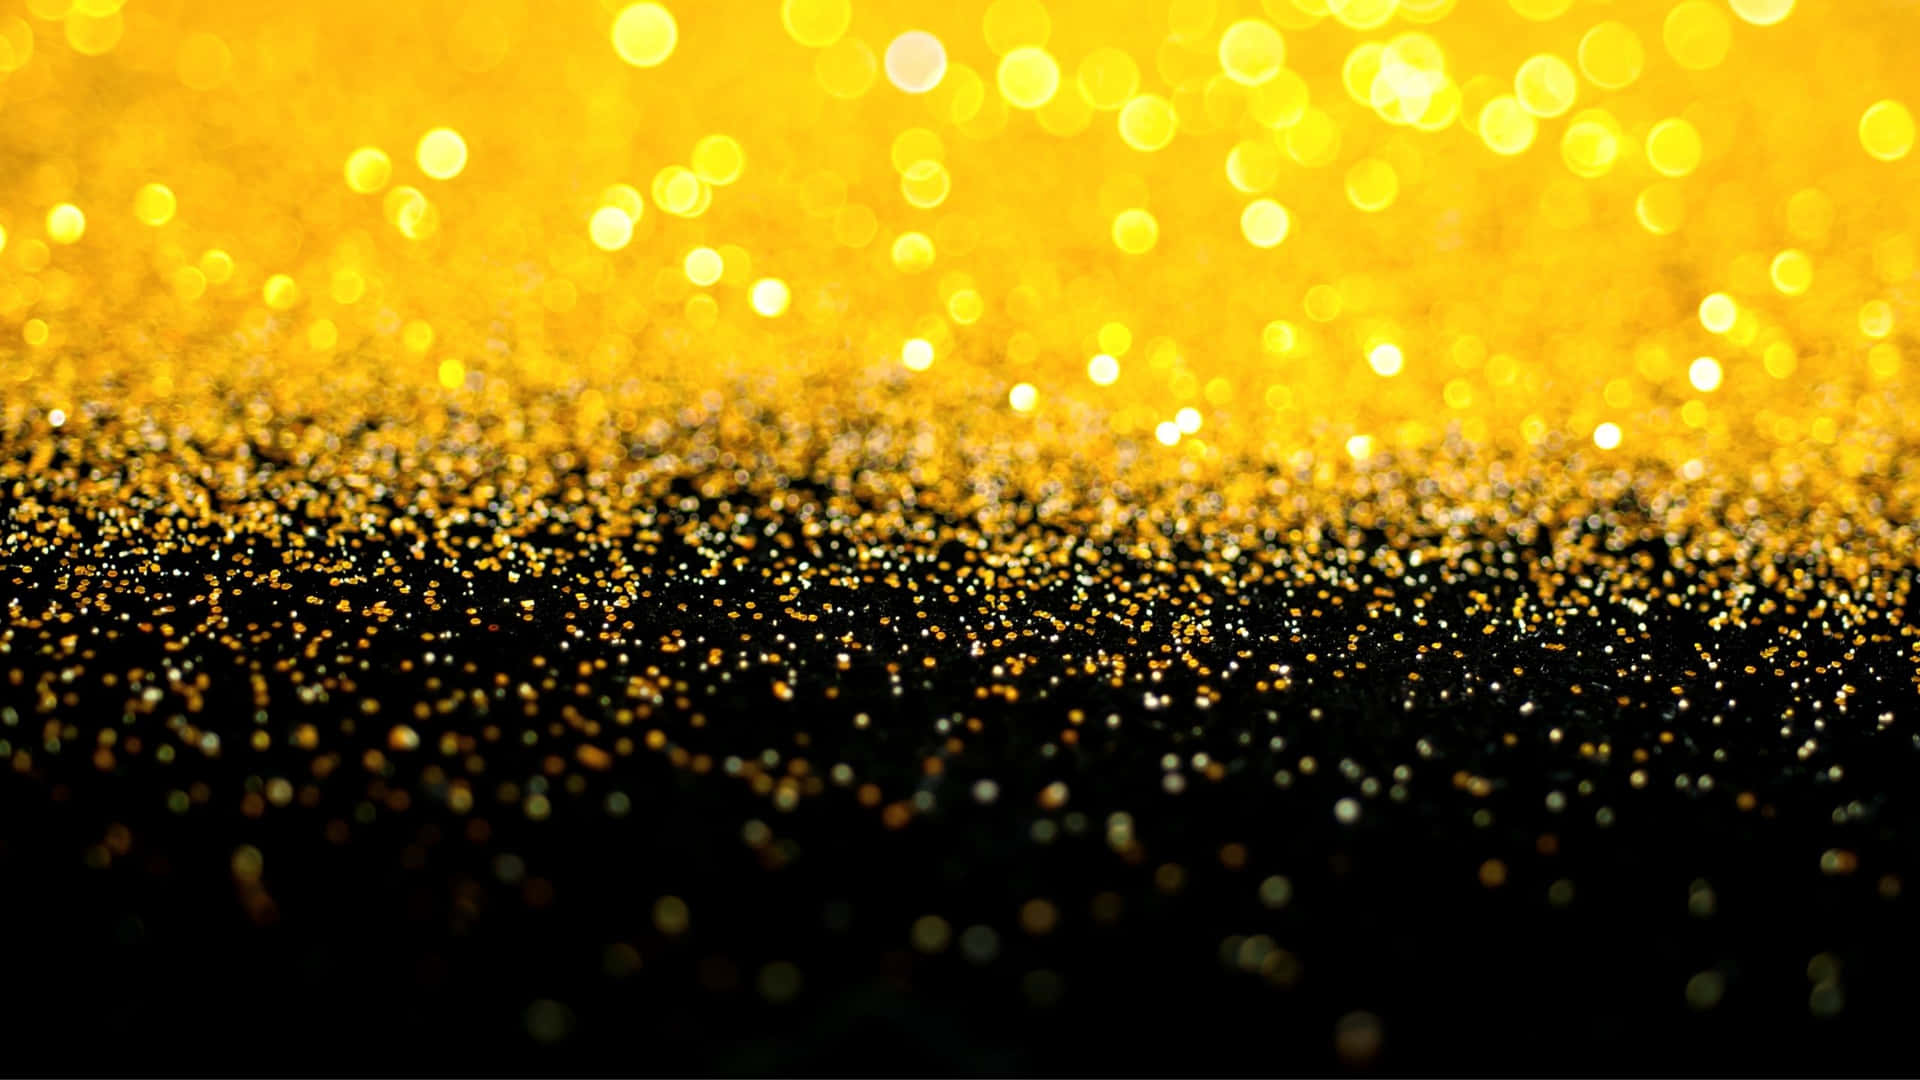 100+] Black And Gold Glitter Wallpapers 